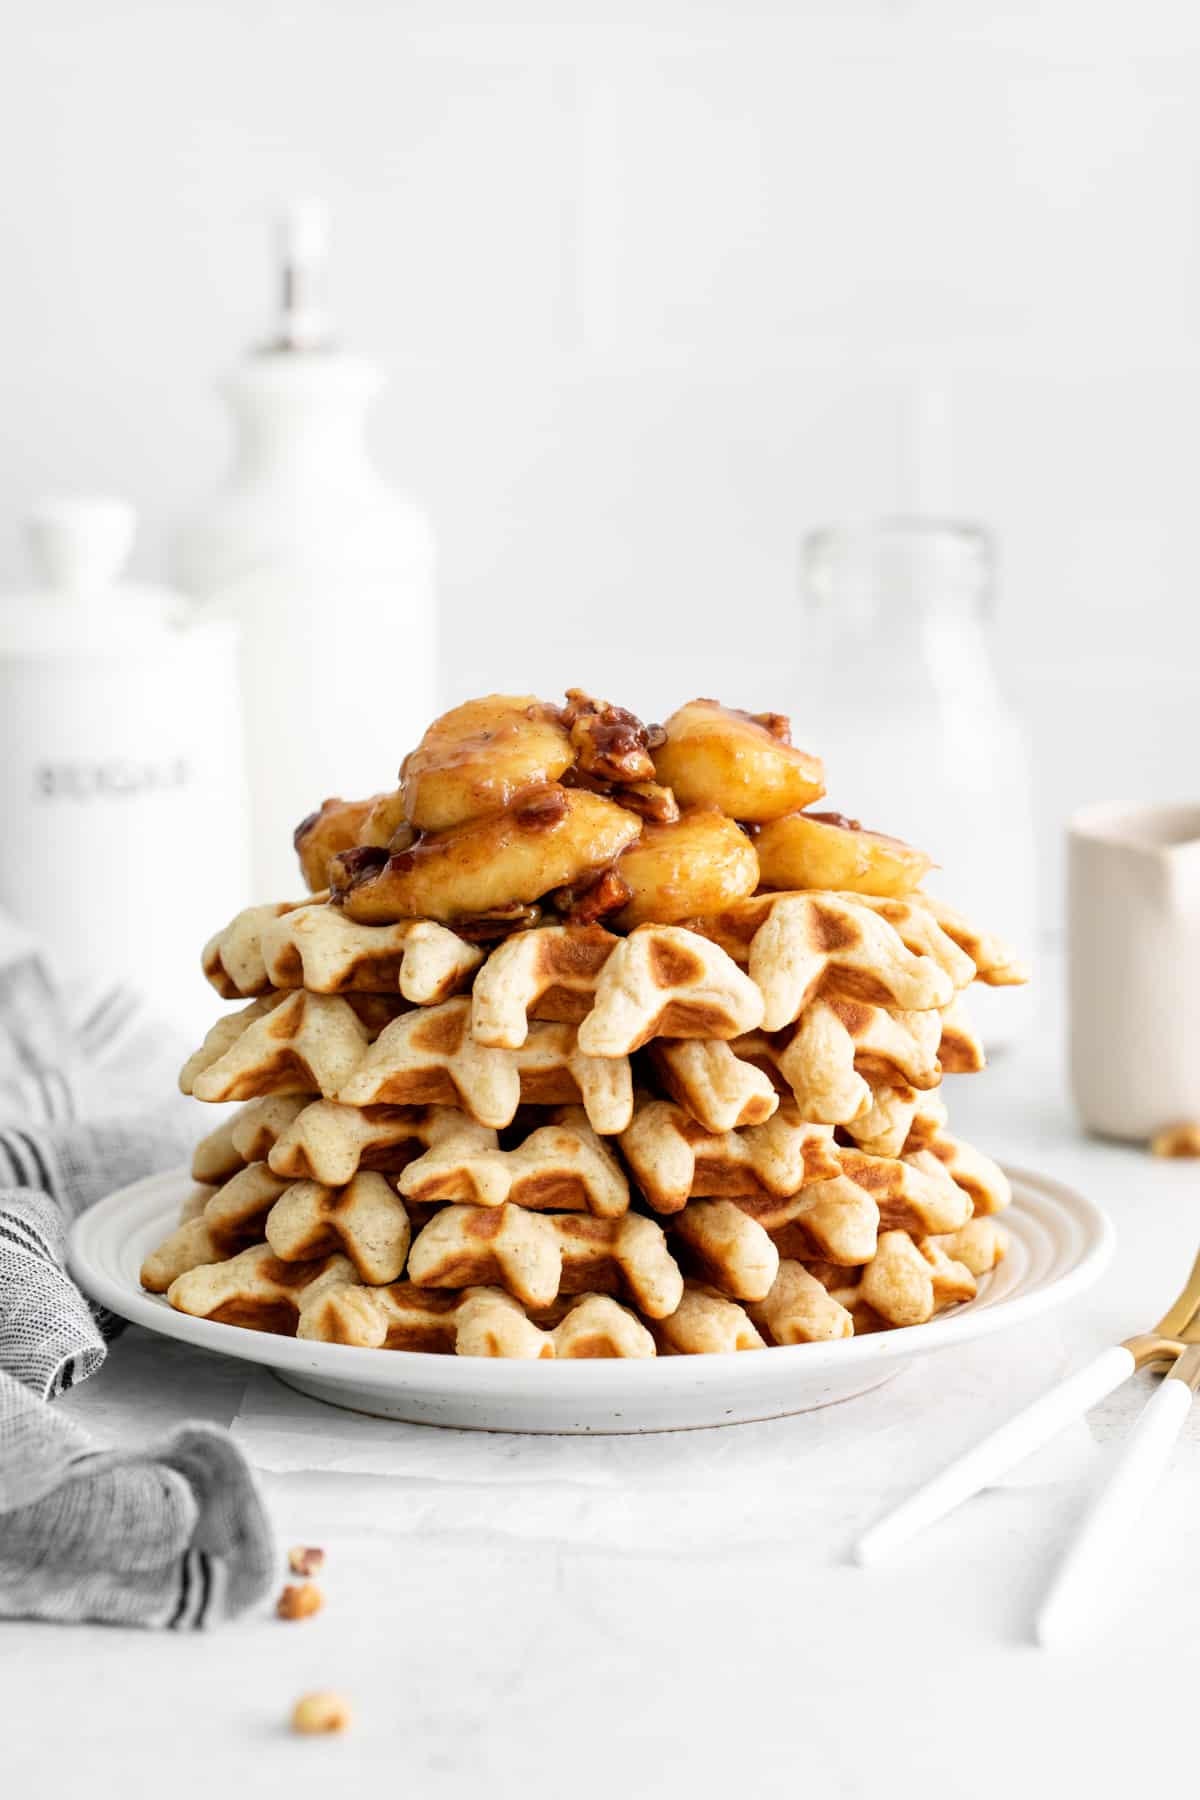 a stack of waffles with bananas foster topping